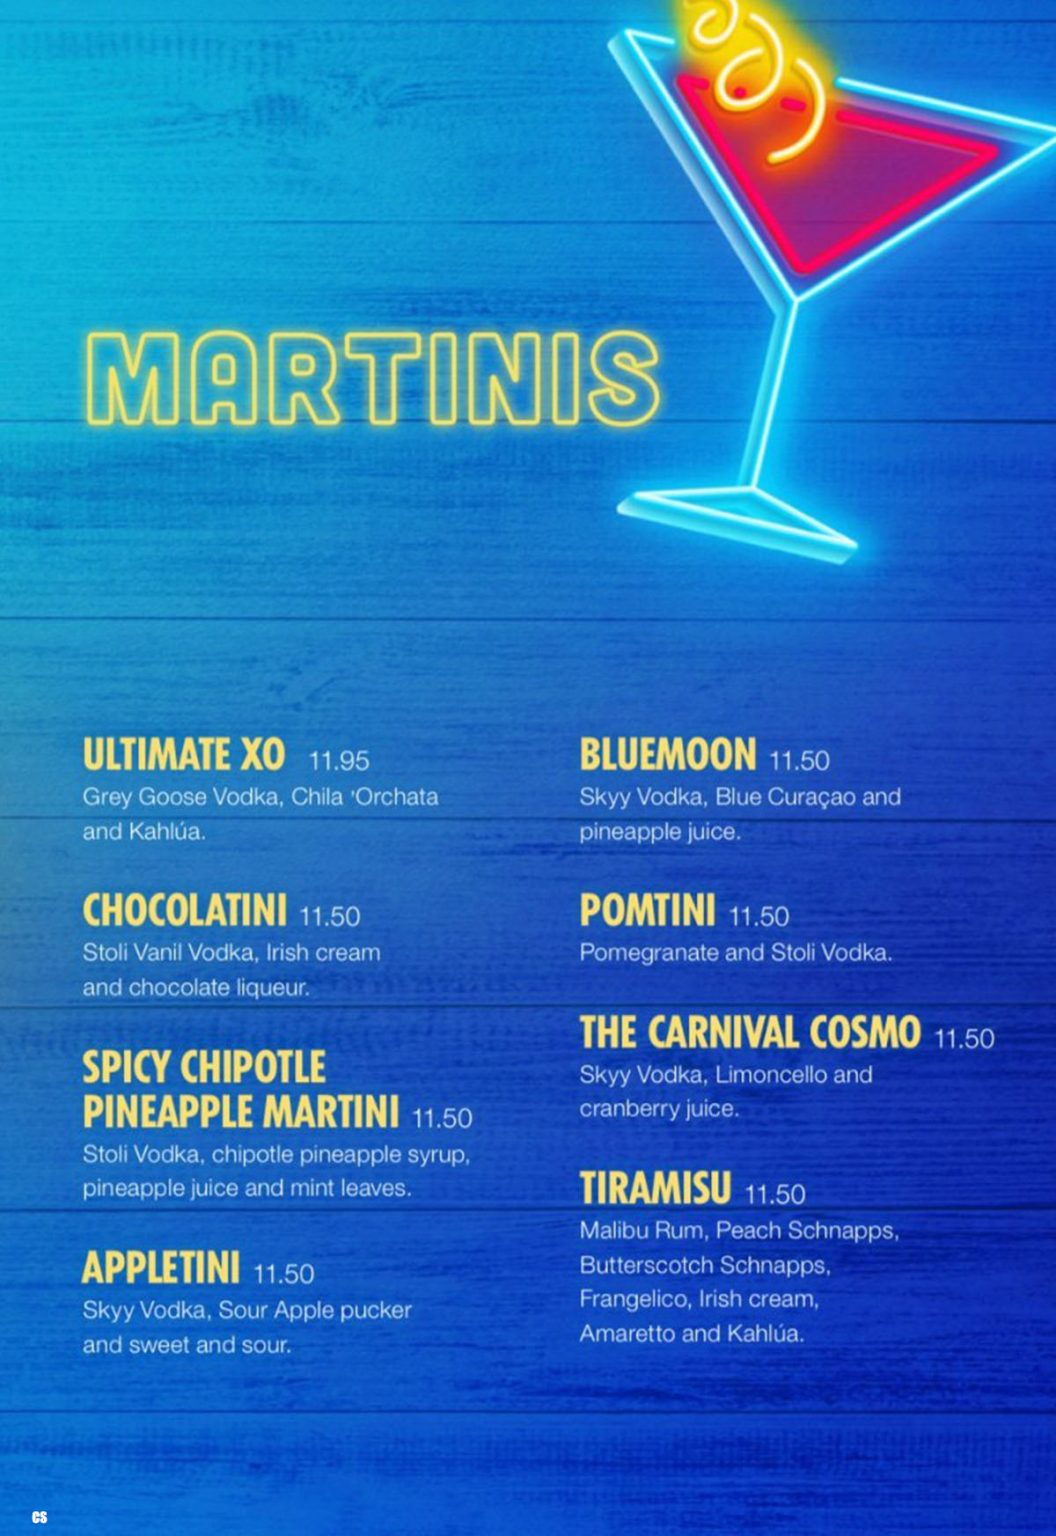 Carnival Cruise Line 2022 Drink Menus and Pricing Cruise Spotlight